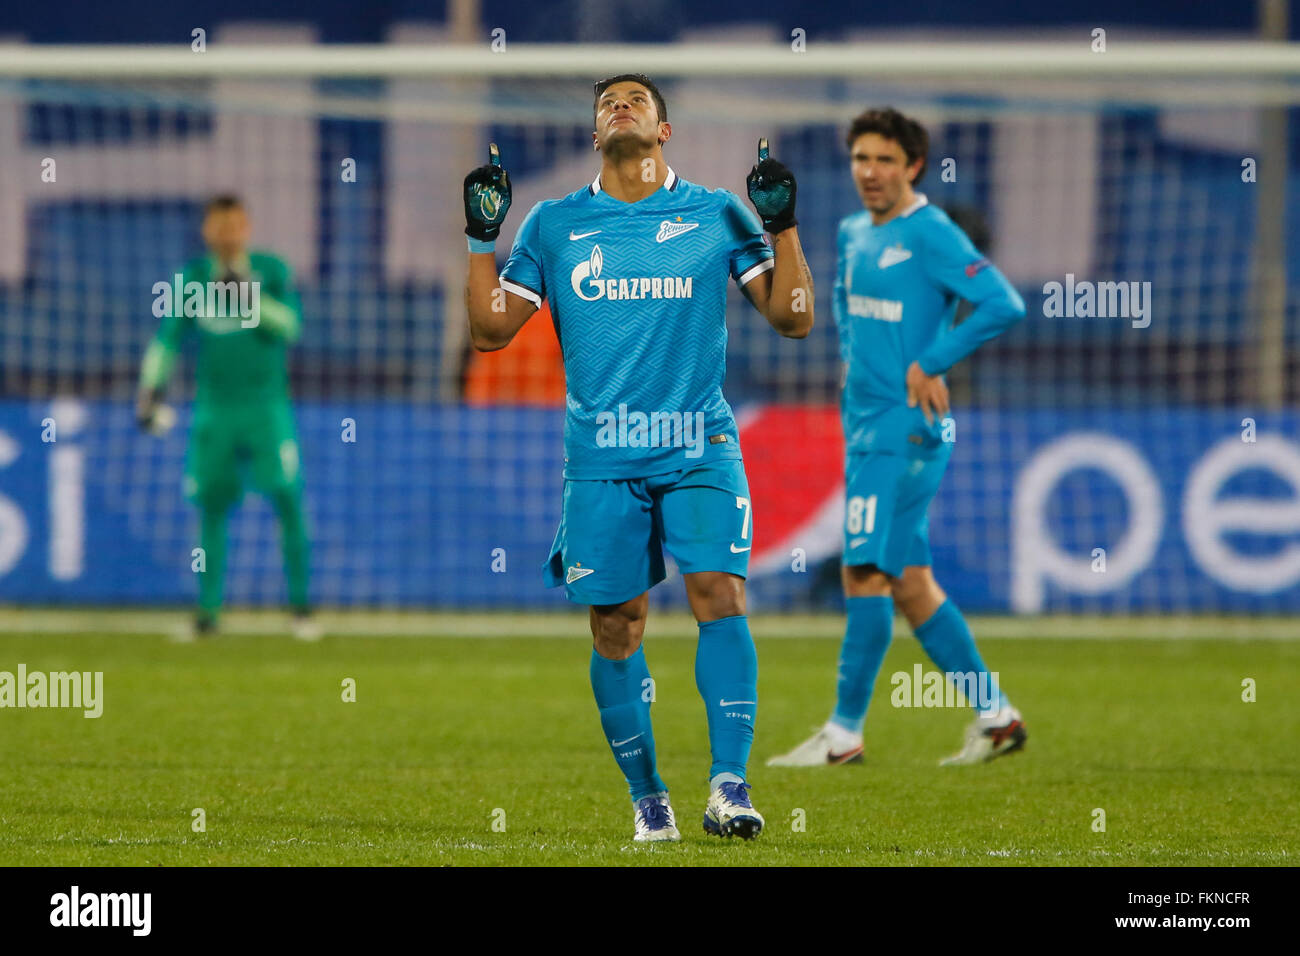 St. Petersburg, Russia. 9th March, 2016. Hulk (C) and Yuri Zhirkov (R) celebrate a goal during the UEFA Champions League Round of 16 second leg match between FC Zenit St. Petersburg and SL Benfica at Petrovsky stadium. Credit:  Mike Kireev/Alamy Live News Stock Photo